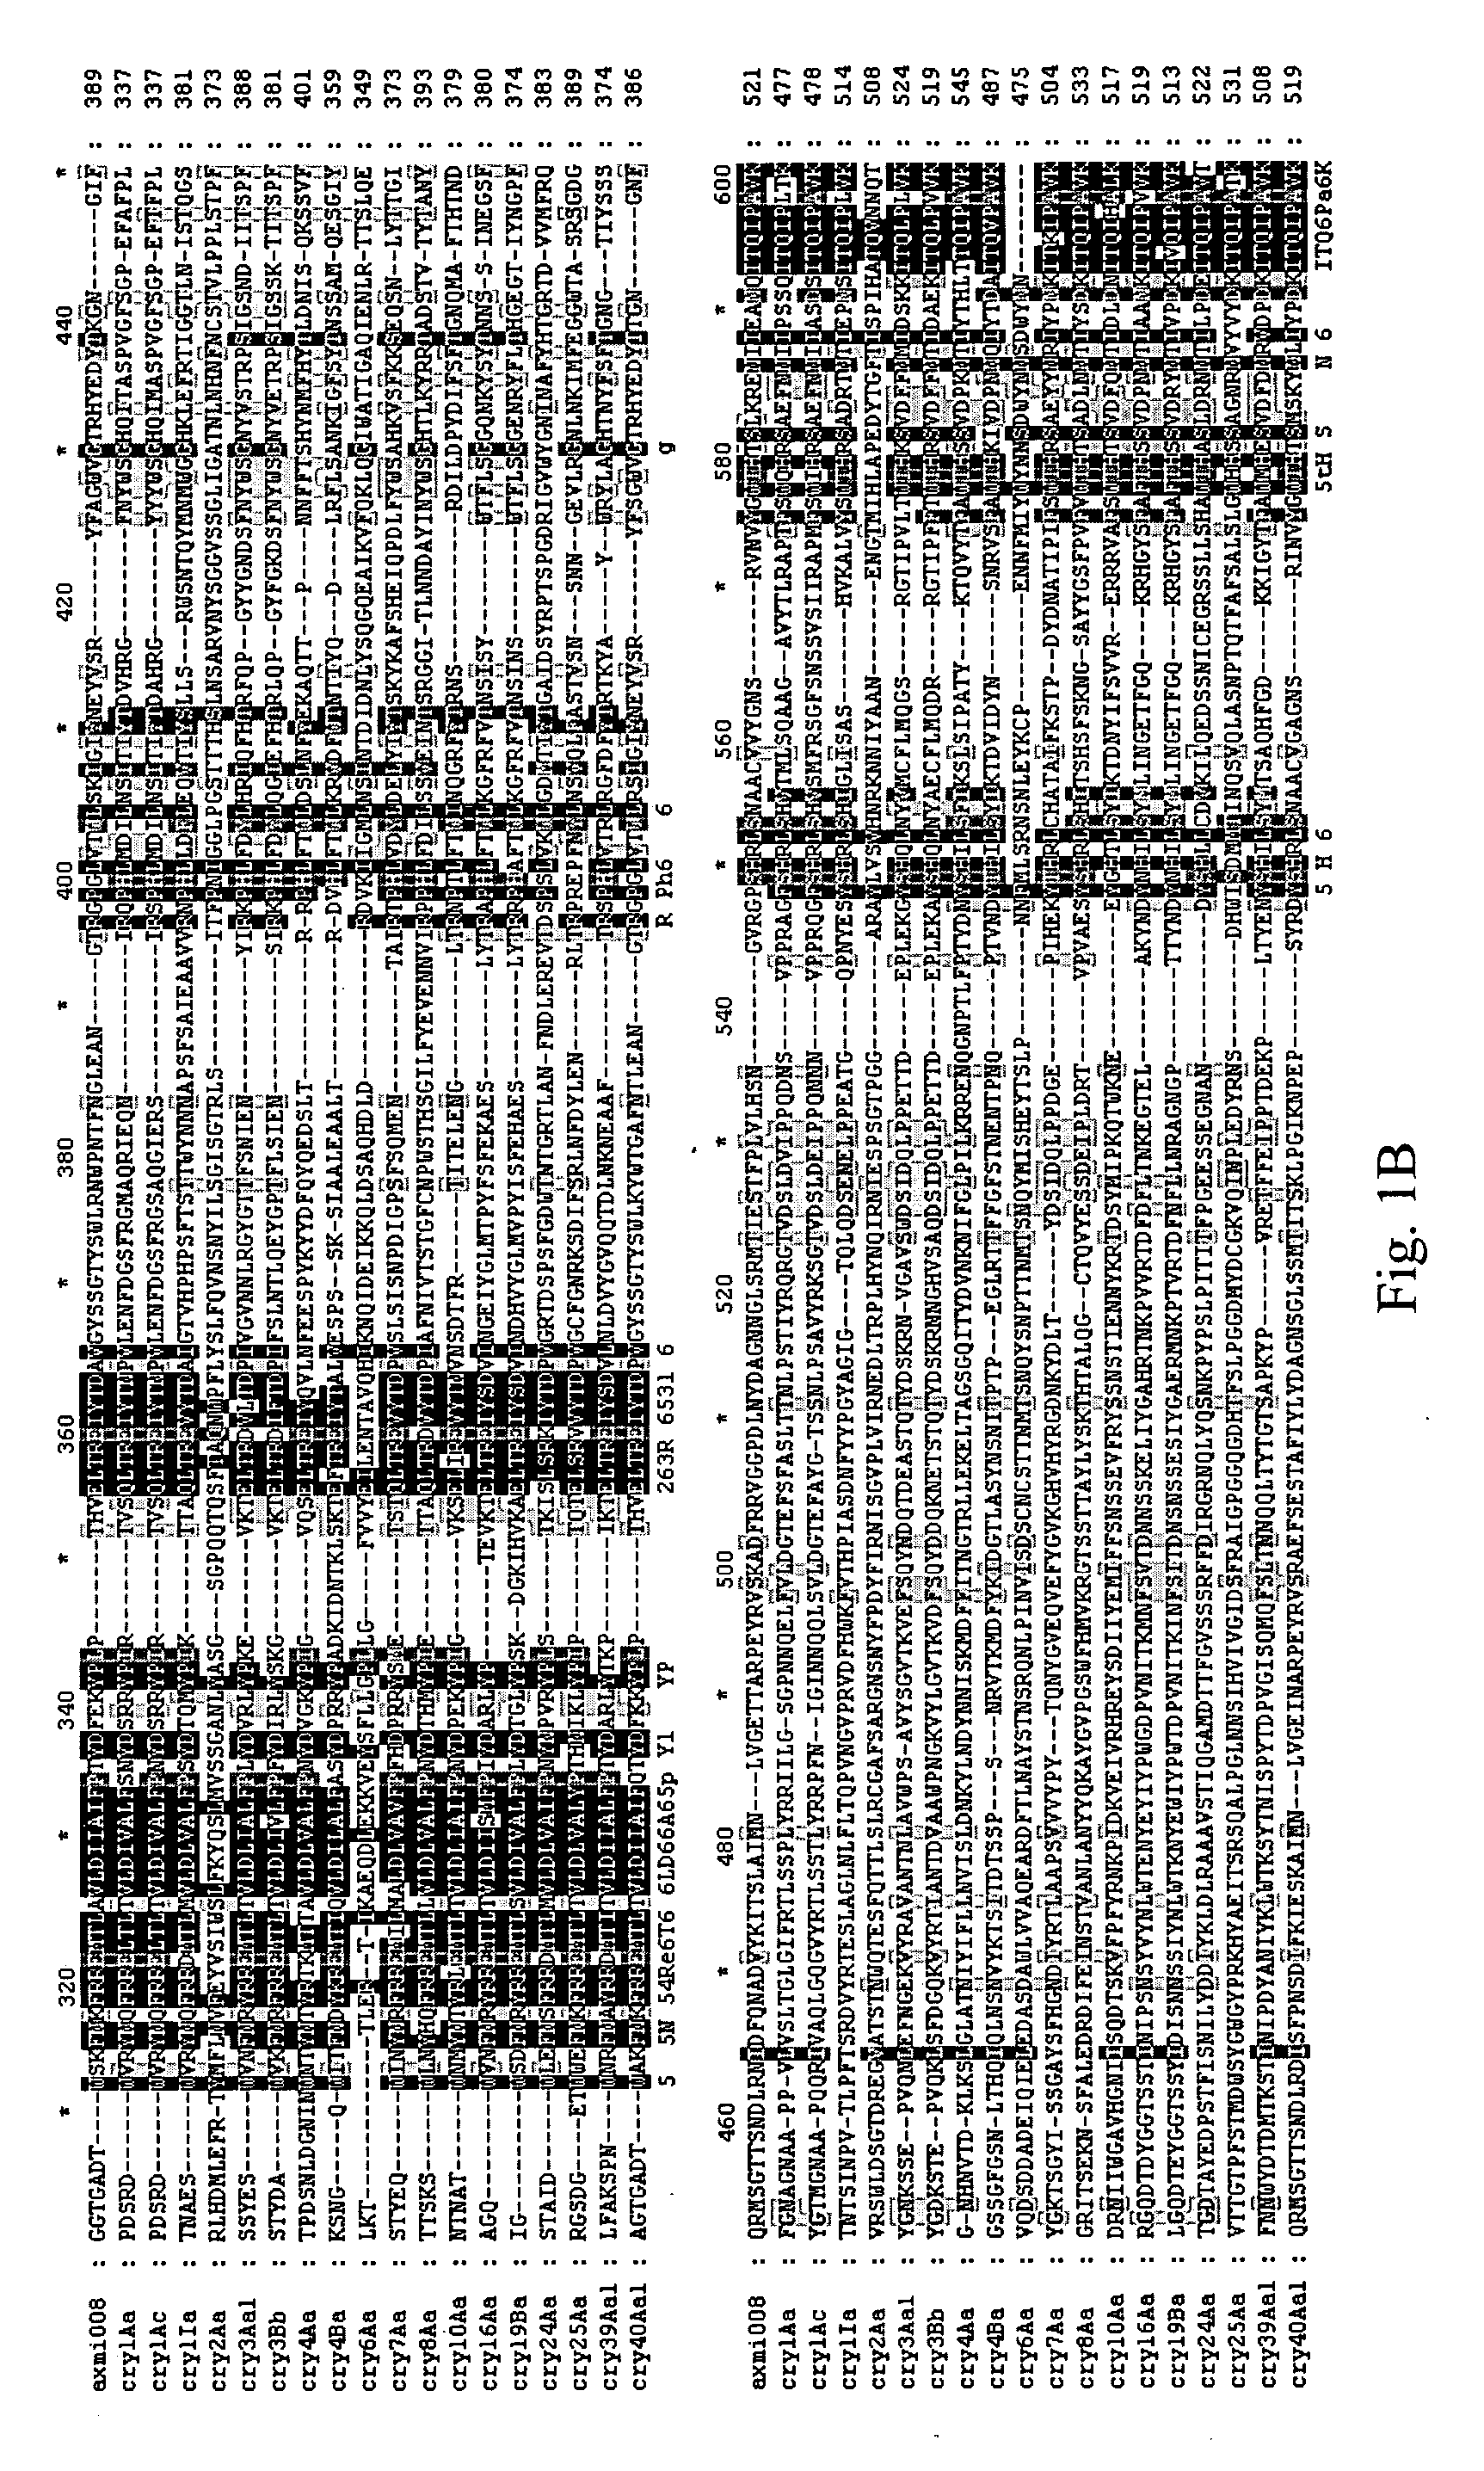 AXMI-008, a delta-endotoxin gene and methods for its use